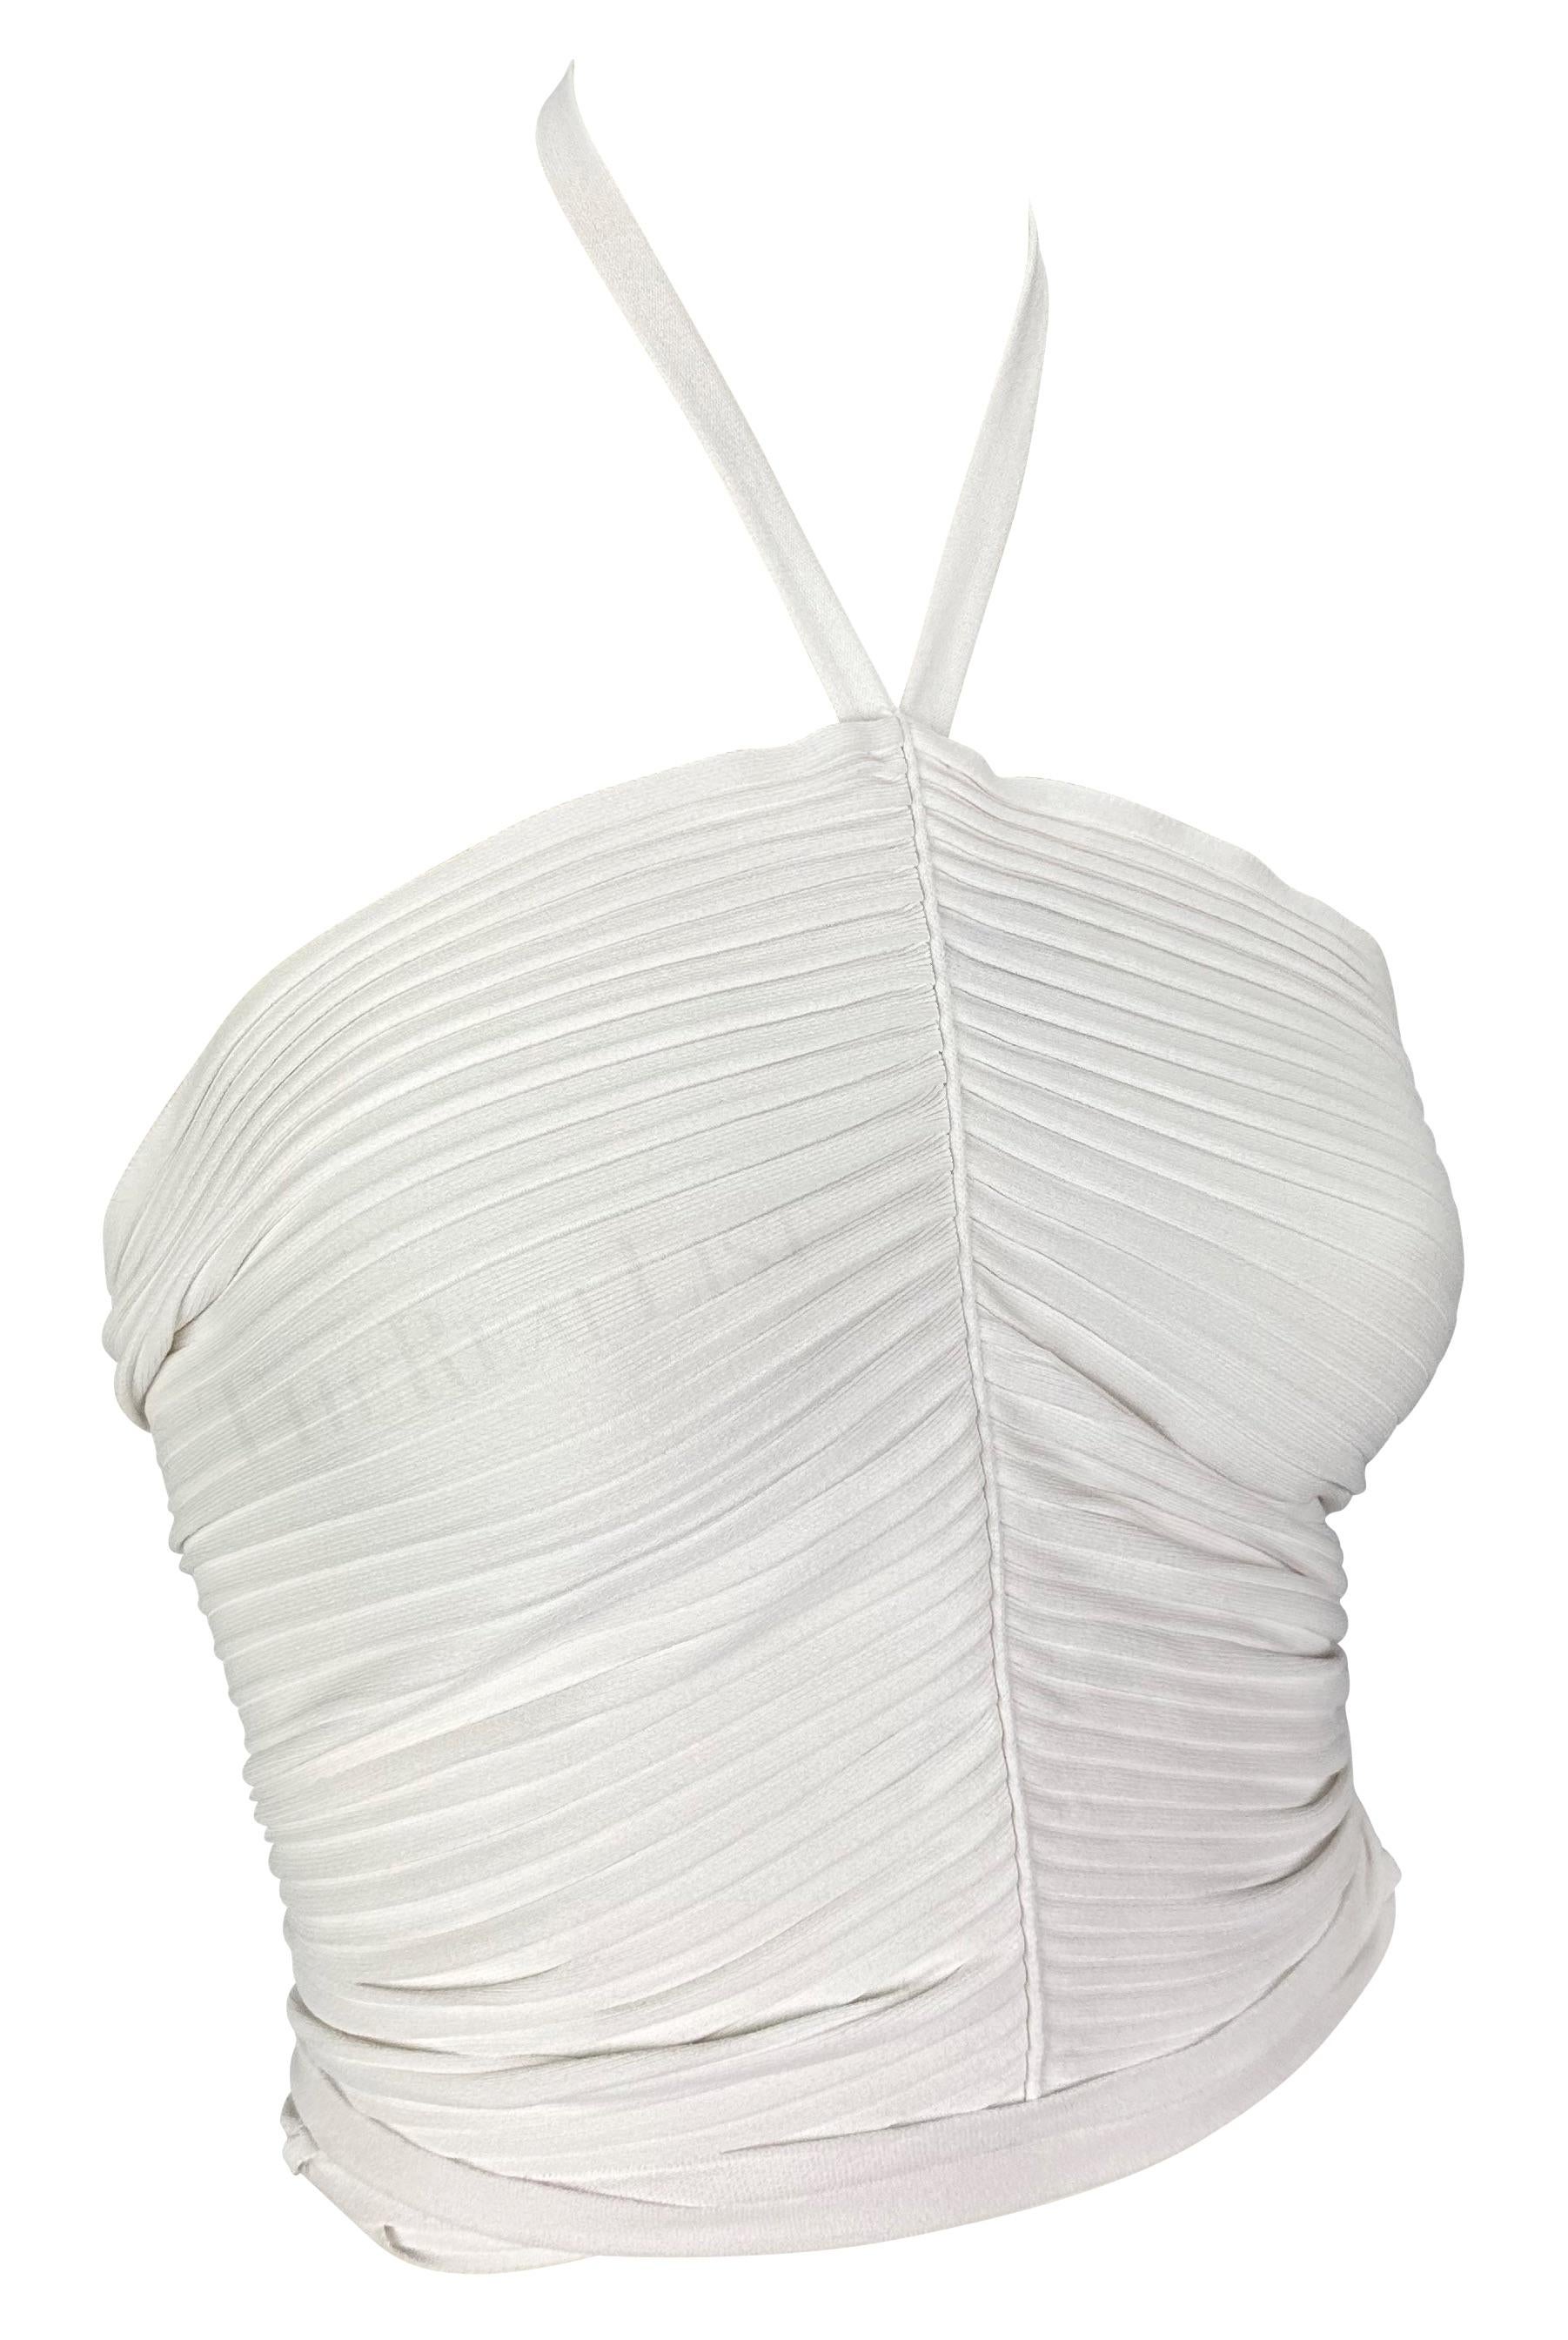 S/S 2000 Gucci by Tom Ford White Ribbed Halter Neck Tank Top For Sale 3